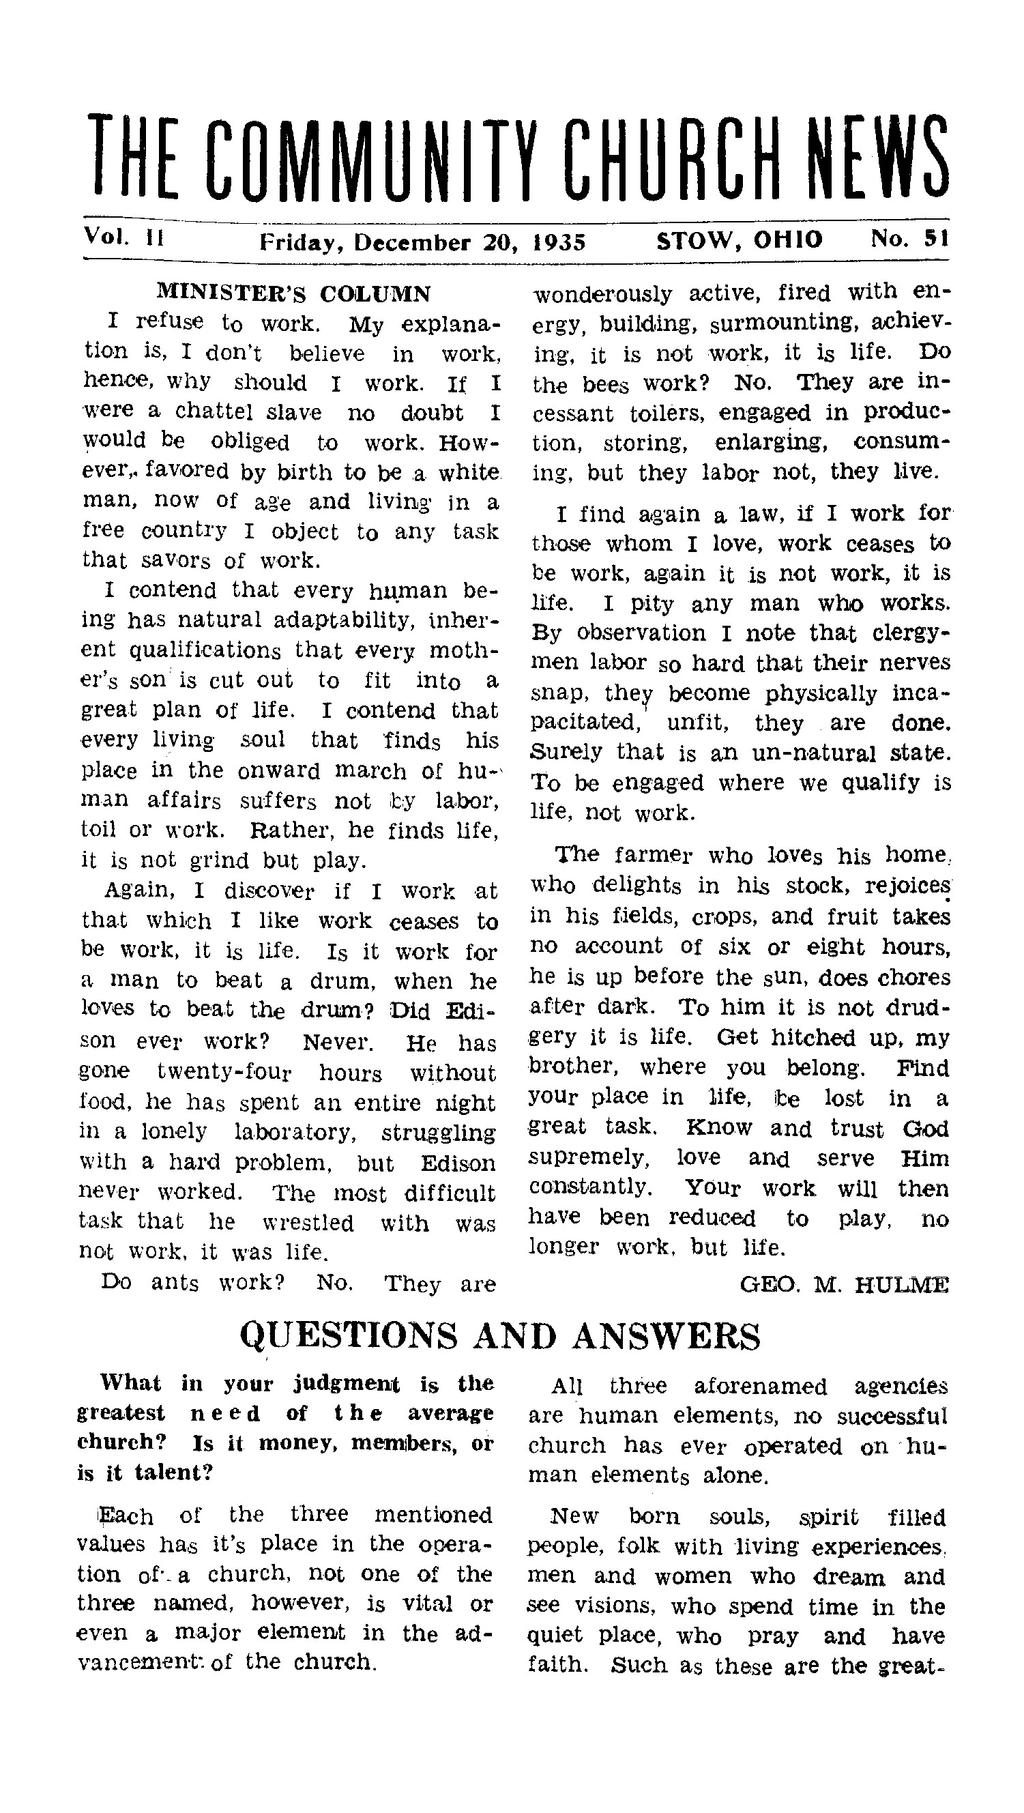 THE COMMUNITY CHURCH NEWS Vol. II Friday, December 20, 1935 STOW, OHIO No. 51 MINISTER'S COLUMN I refuse to work. My explanation is, I don't believe in work, hence, why should I work.